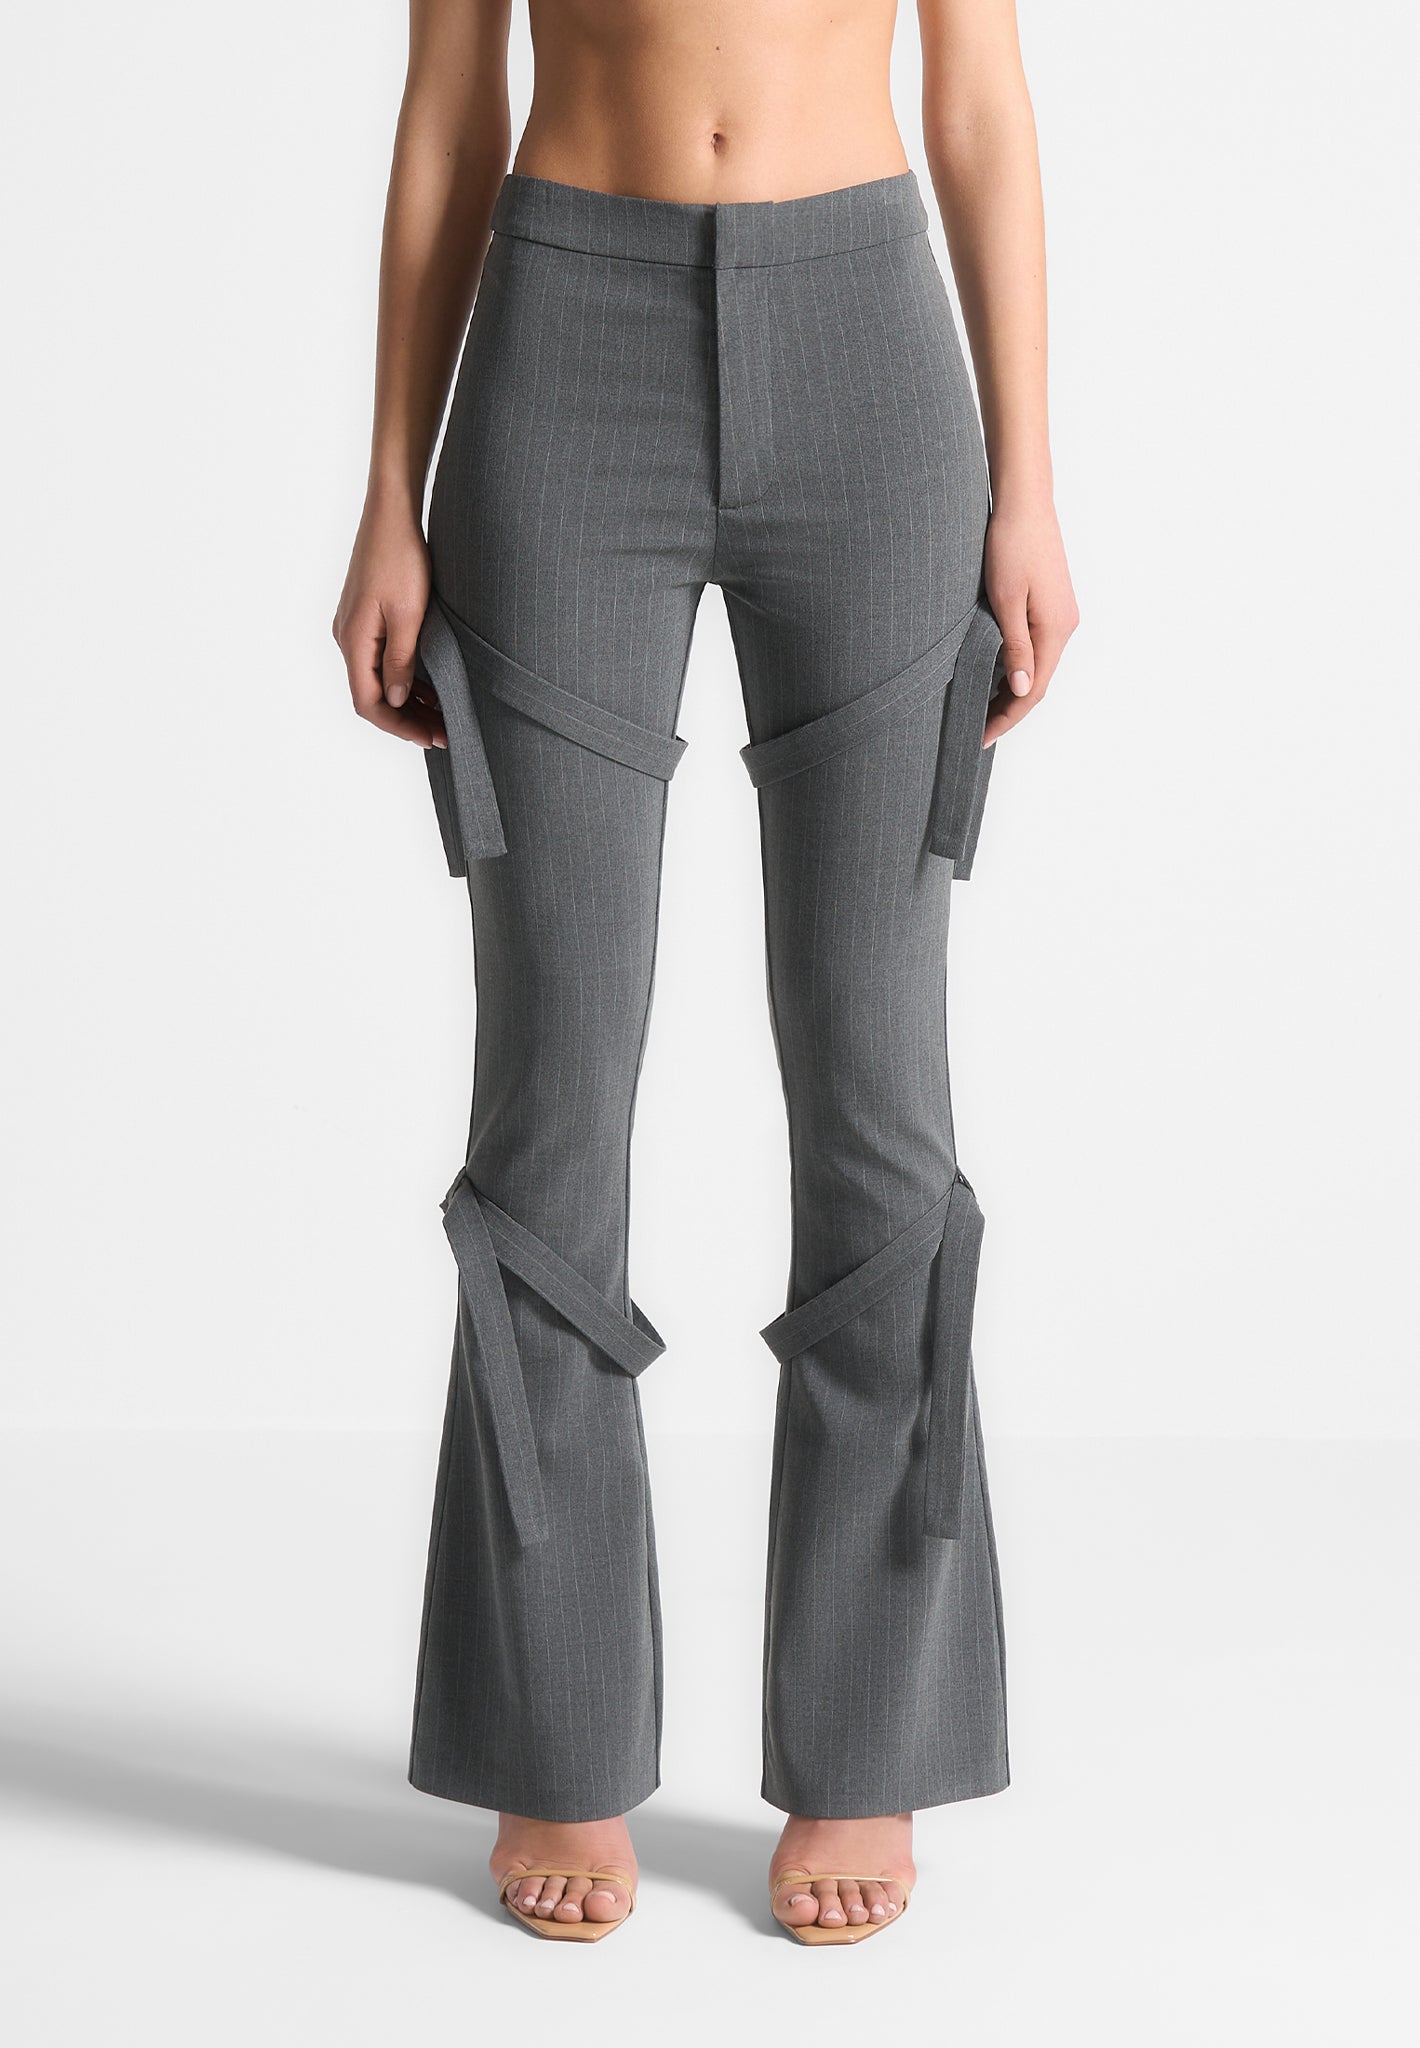 Strap Detail Pinstripe Fit and Flare Leggings - Grey